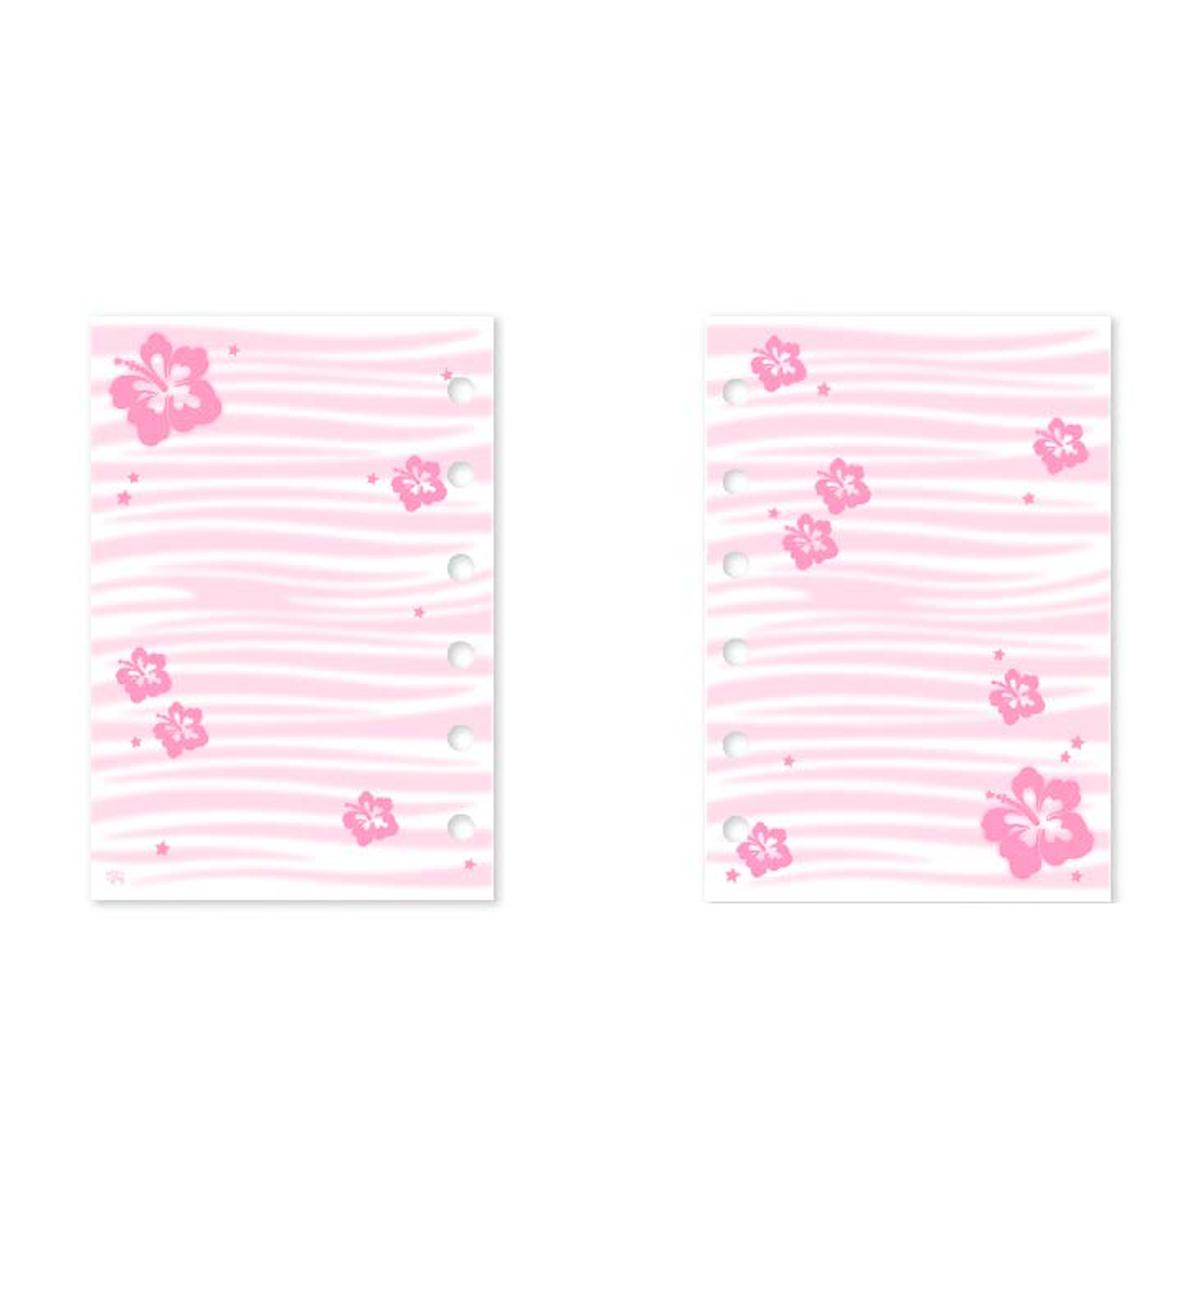 A7 Cool Girl Paper Refill